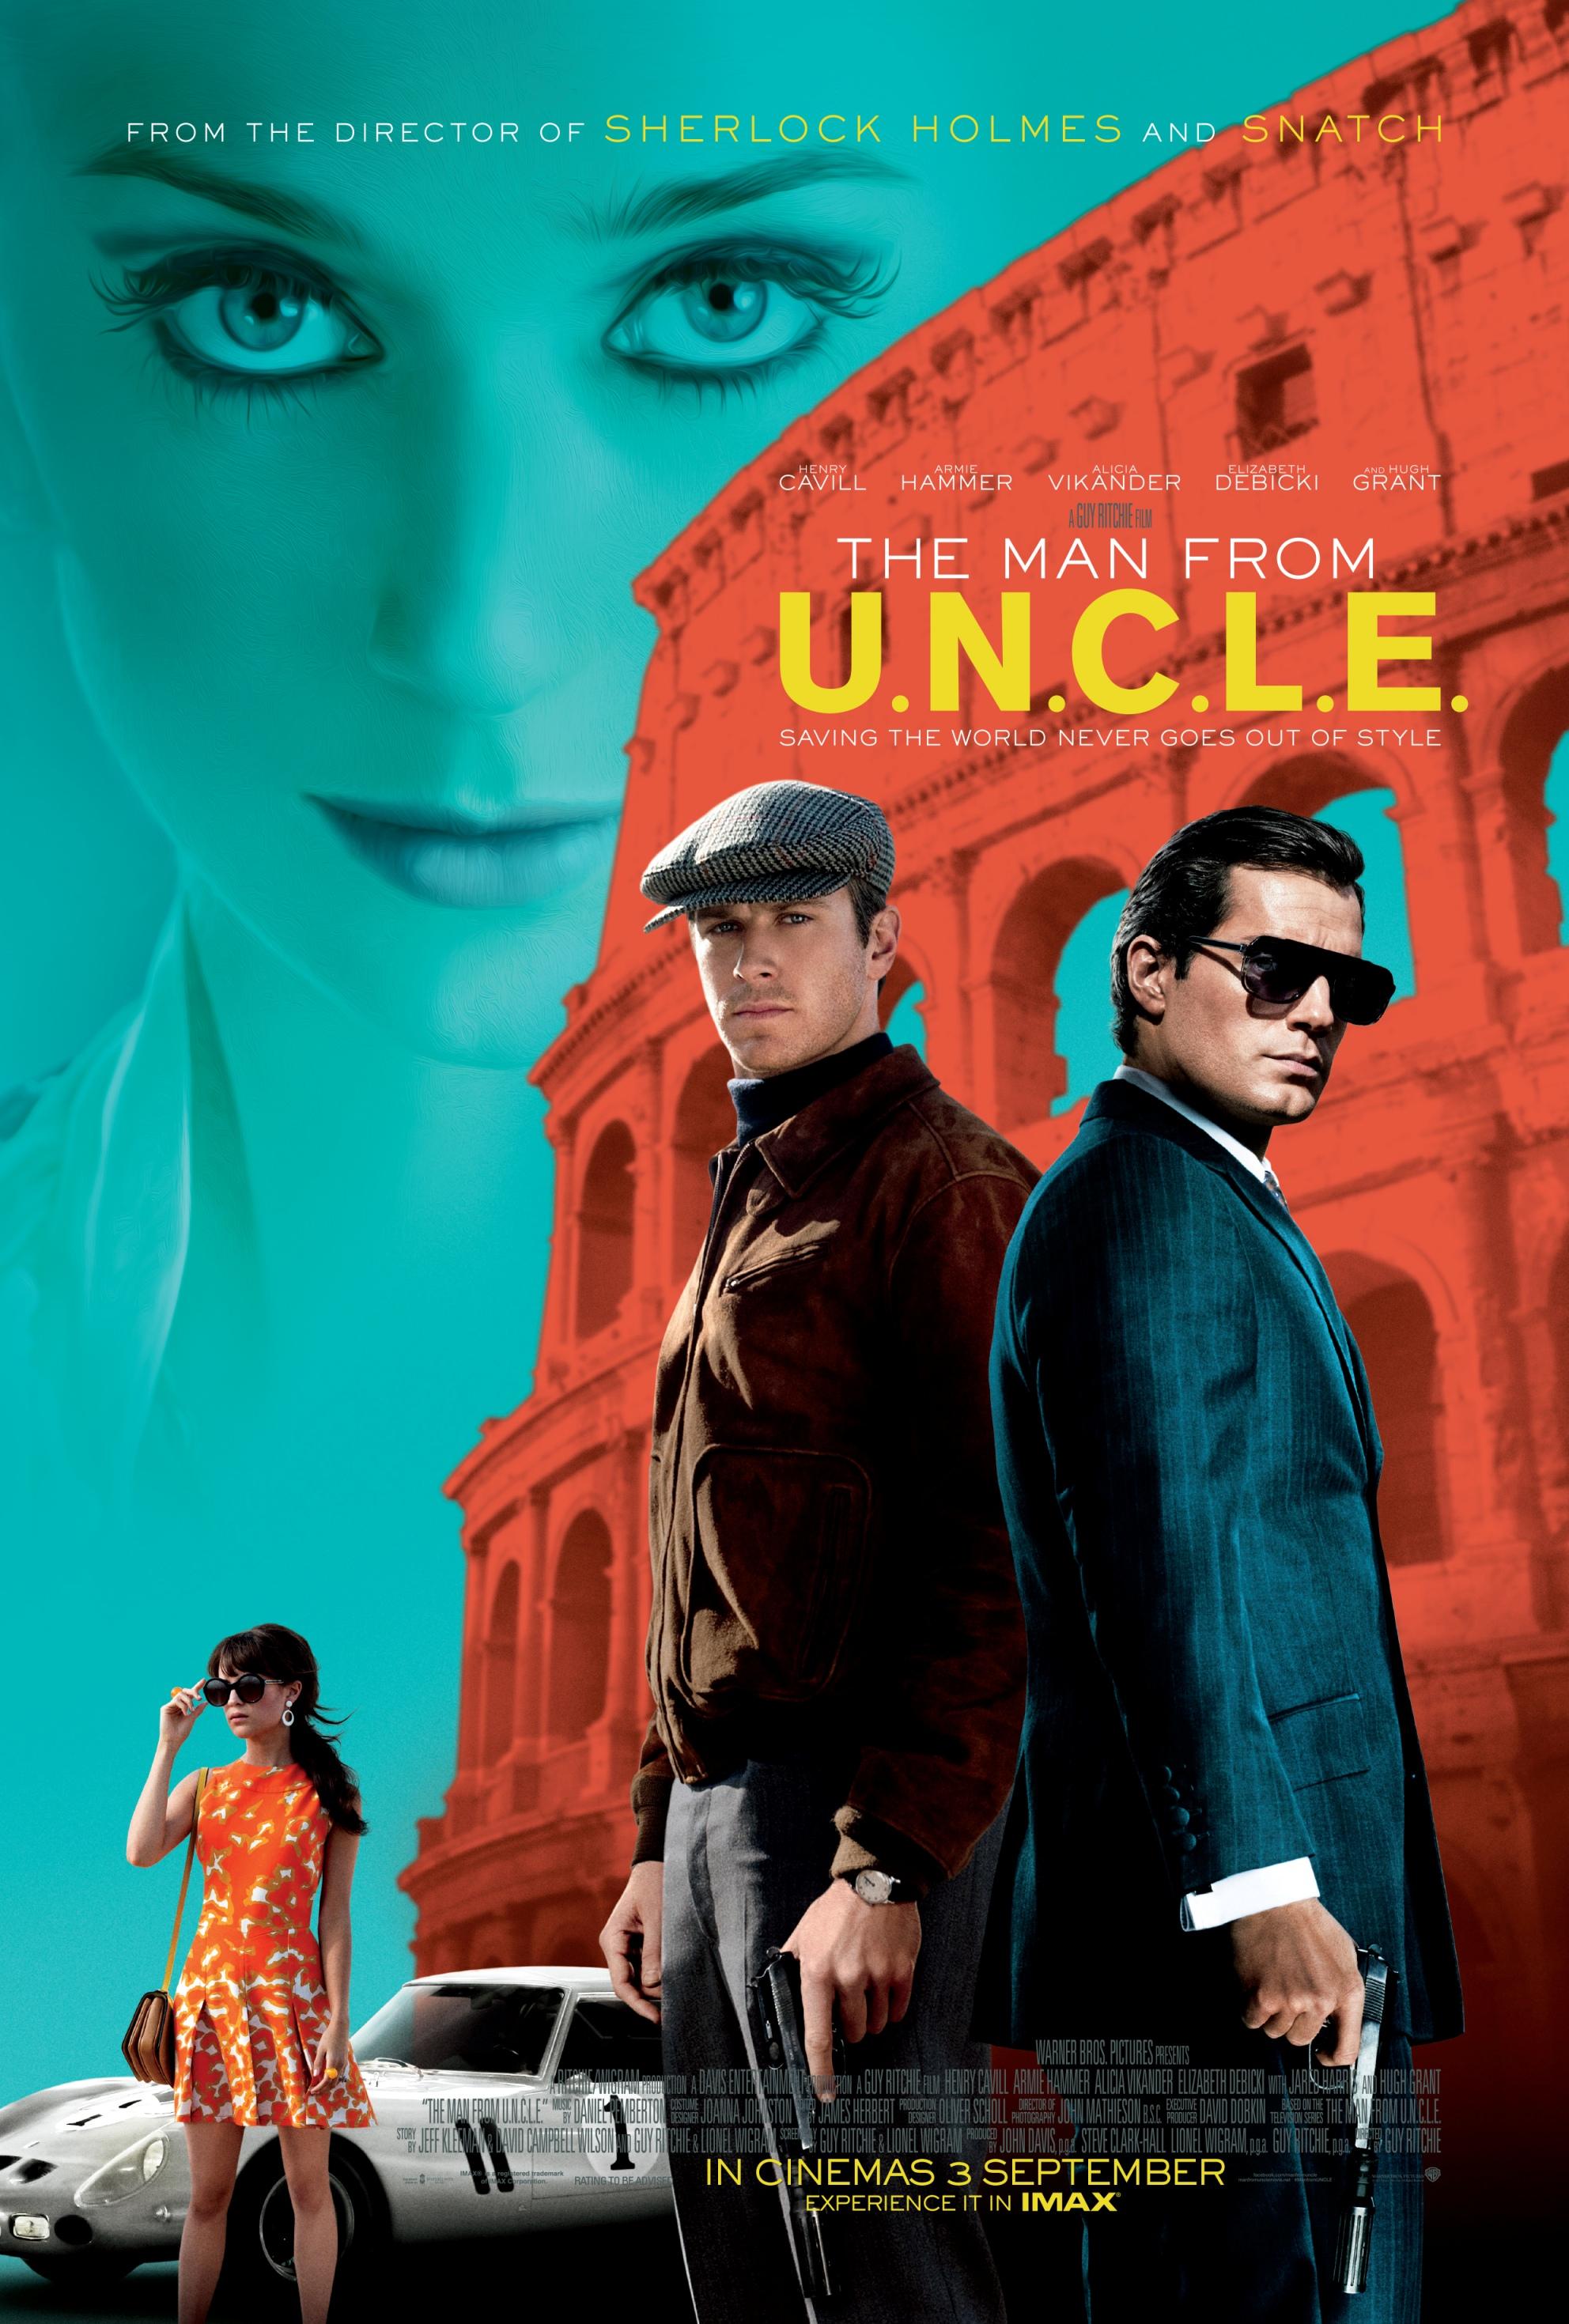 The Man from U.N.C.L.E. [2015]